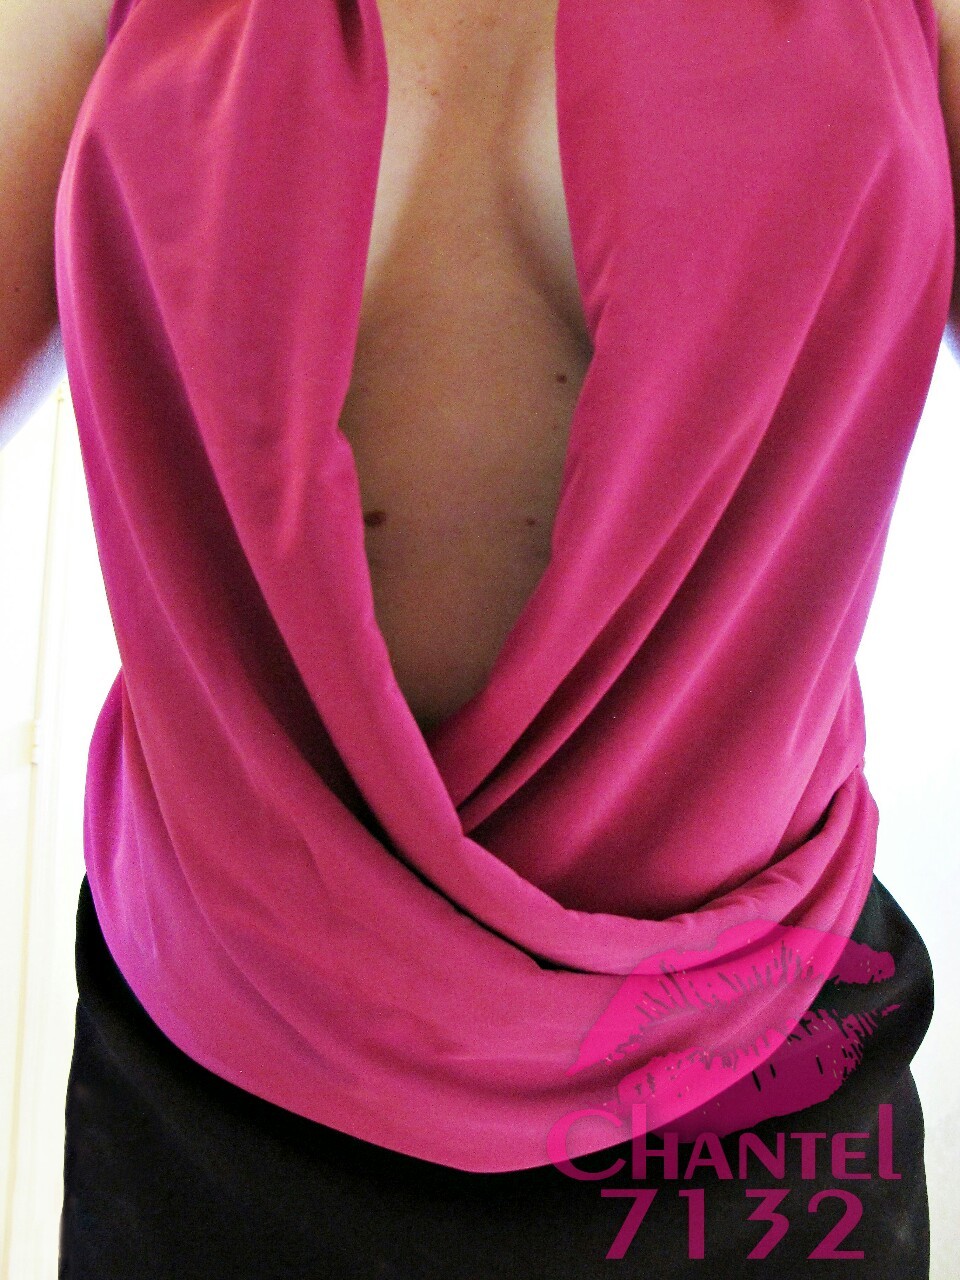 chantel7132-original:  My fav outfit.   Love this hot pink low cut blouse and hot